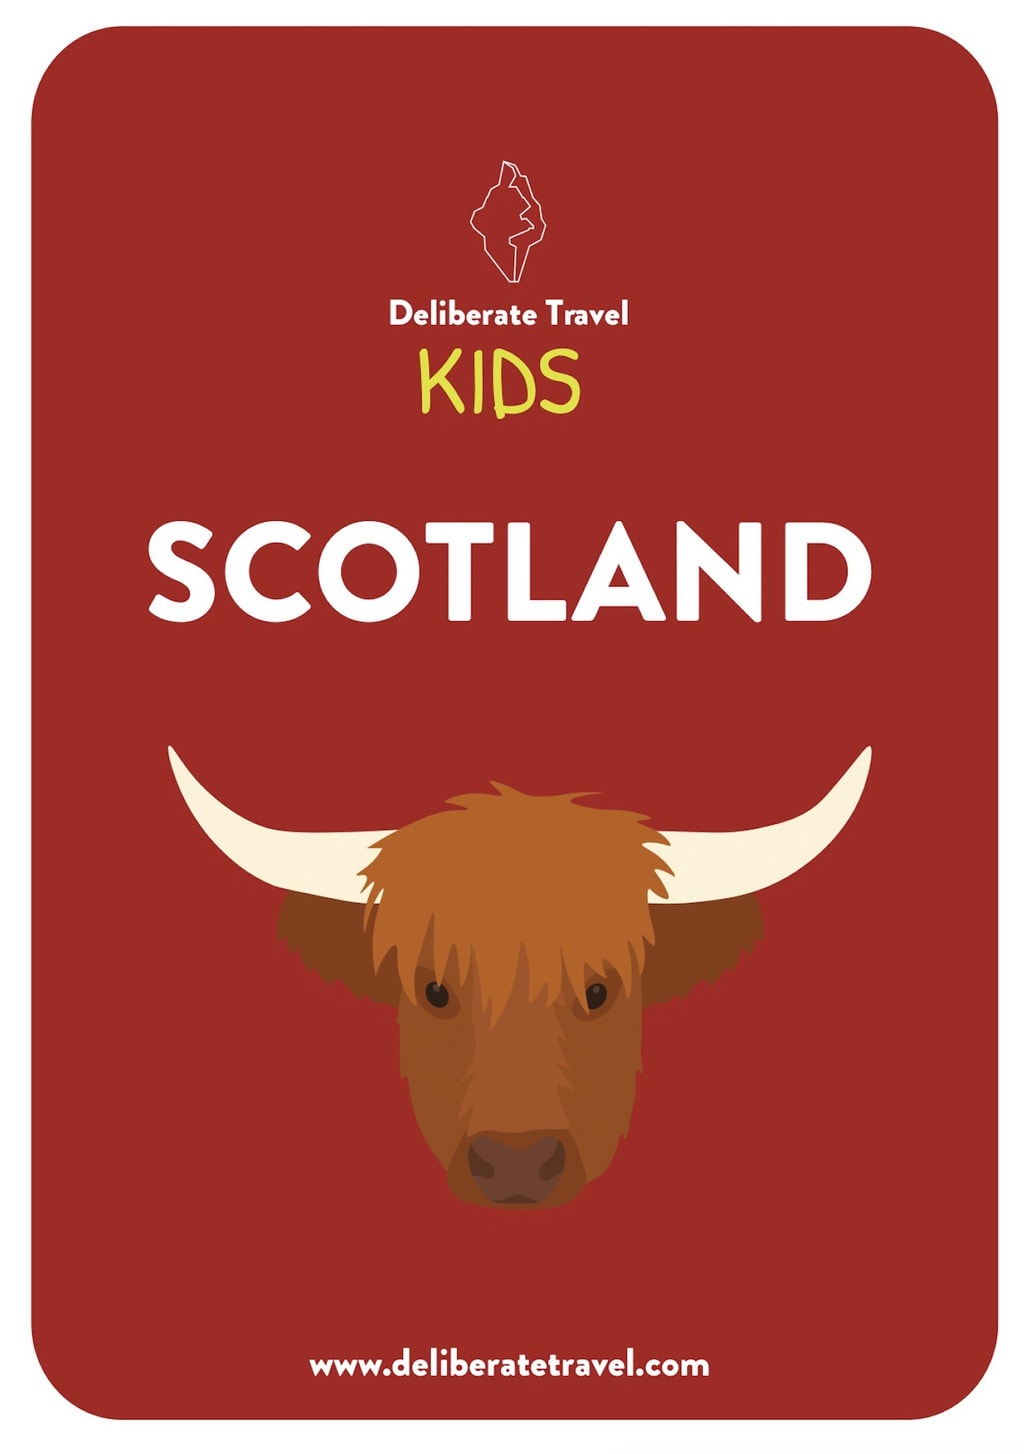 8 Scotland-themed activities to try with kids